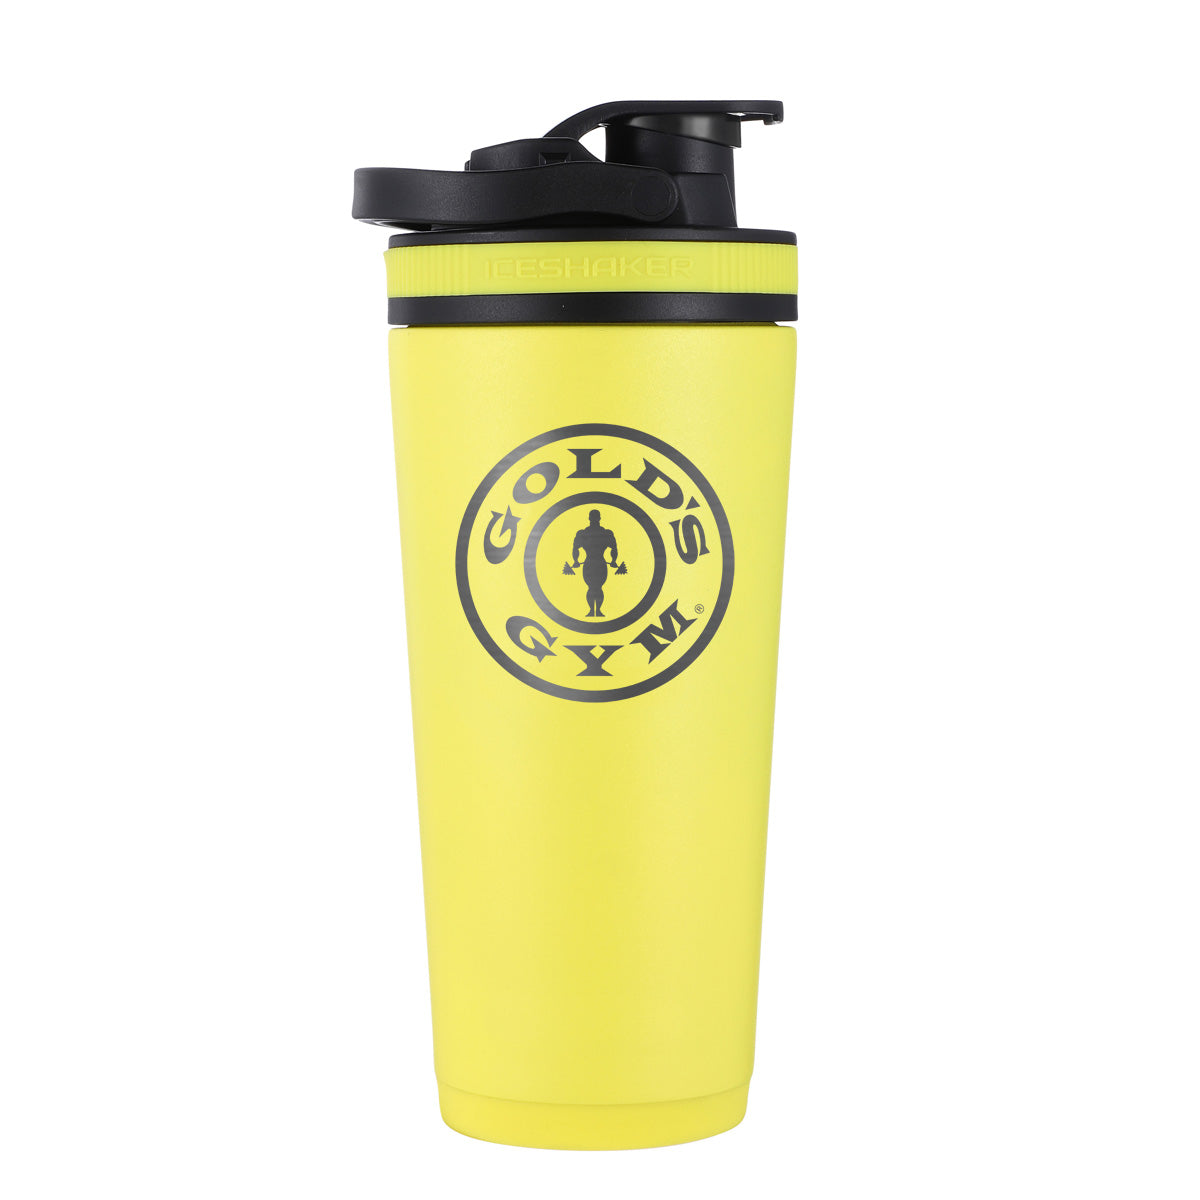 Blender Bottle Gold's Gym Classic 45 oz. SpoutGuard Shaker Cup - Moss Green  : : Health, Household & Personal Care